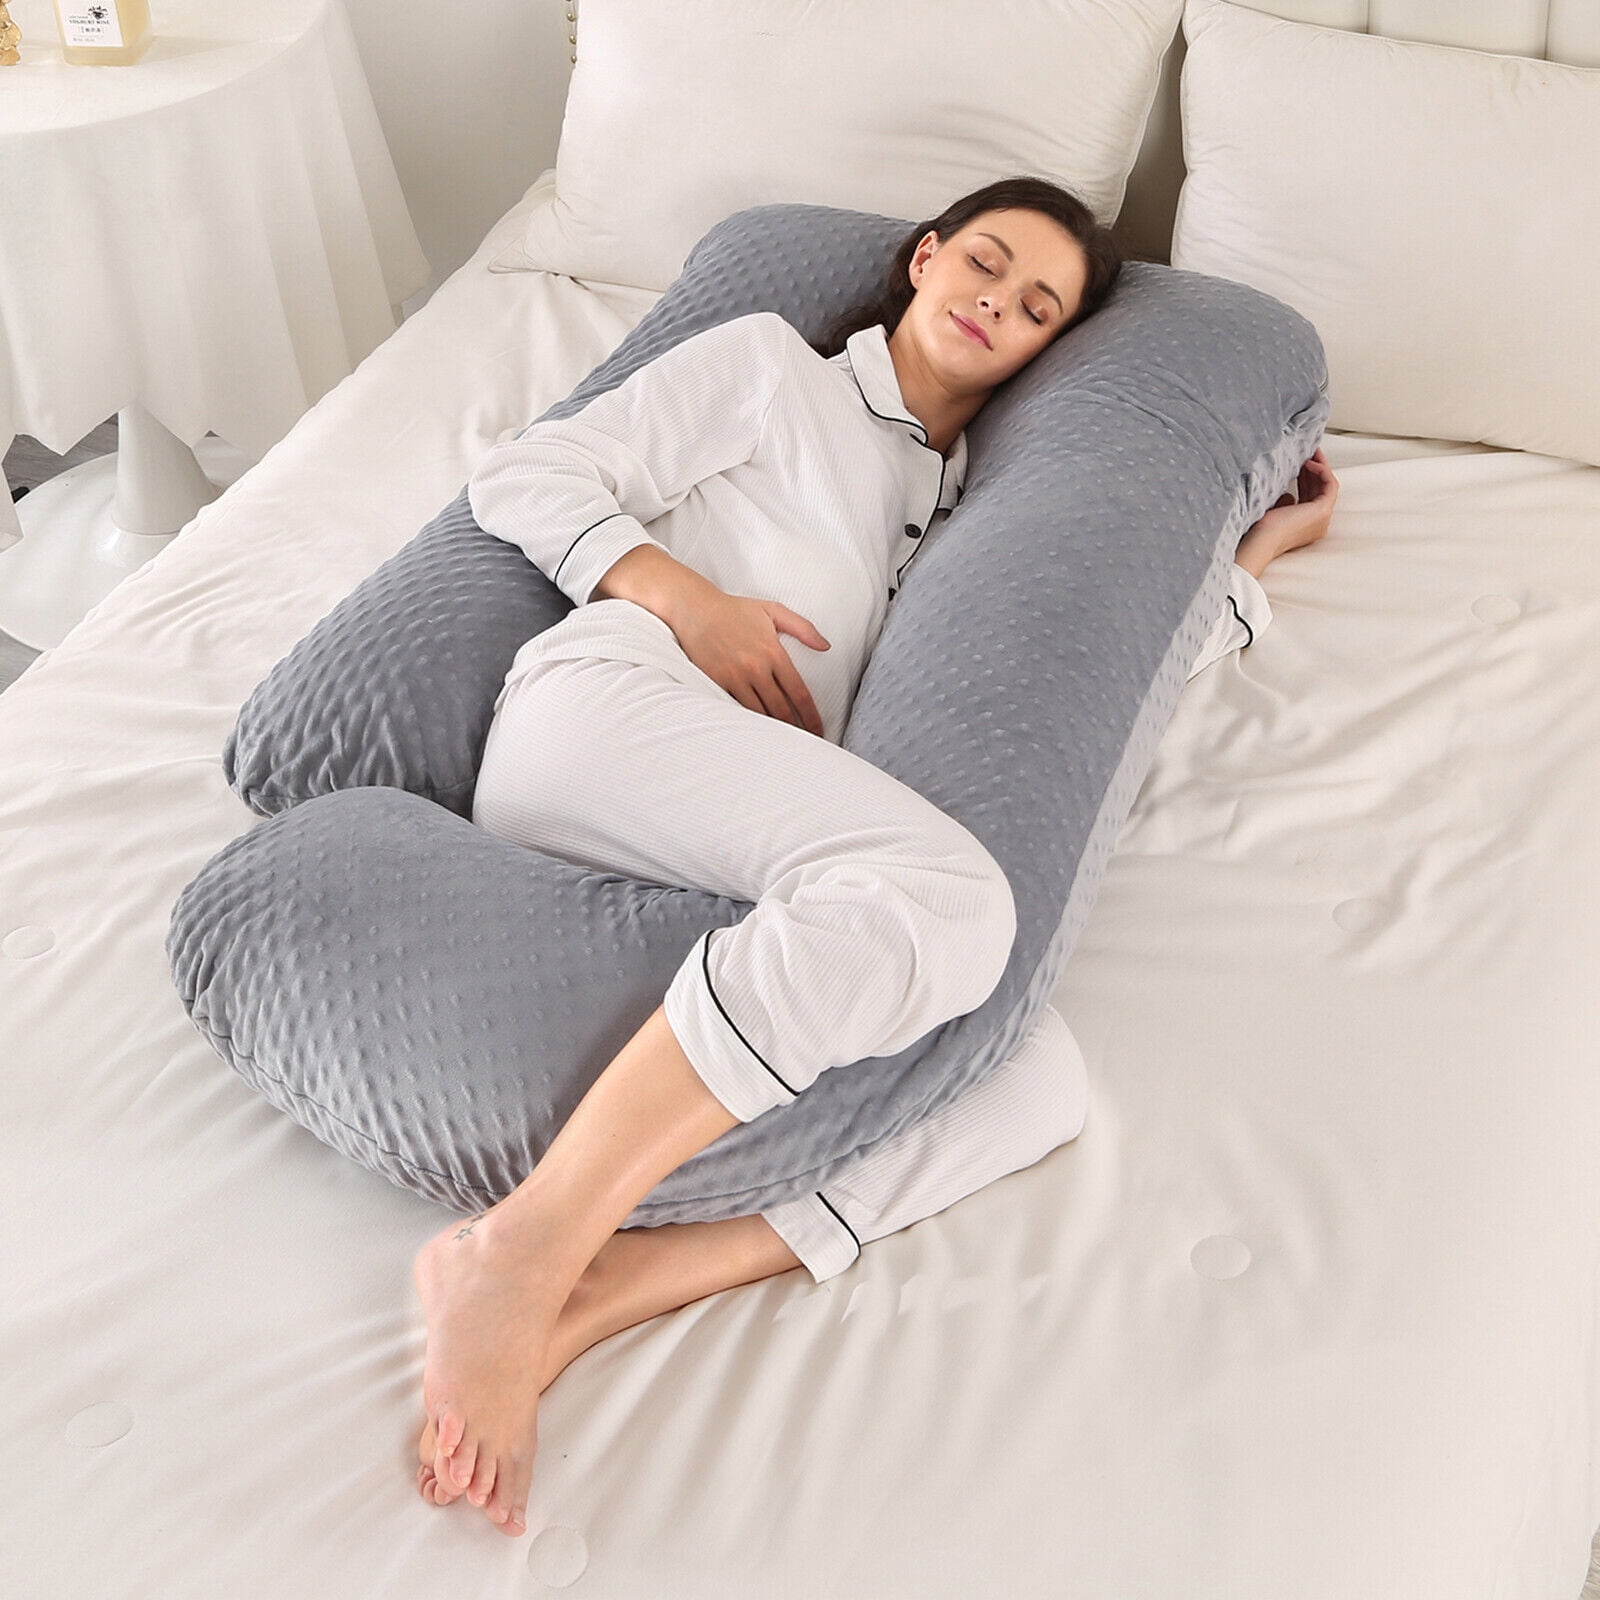 J Shaped Maternity Body Pillow for Mothers-to-Be